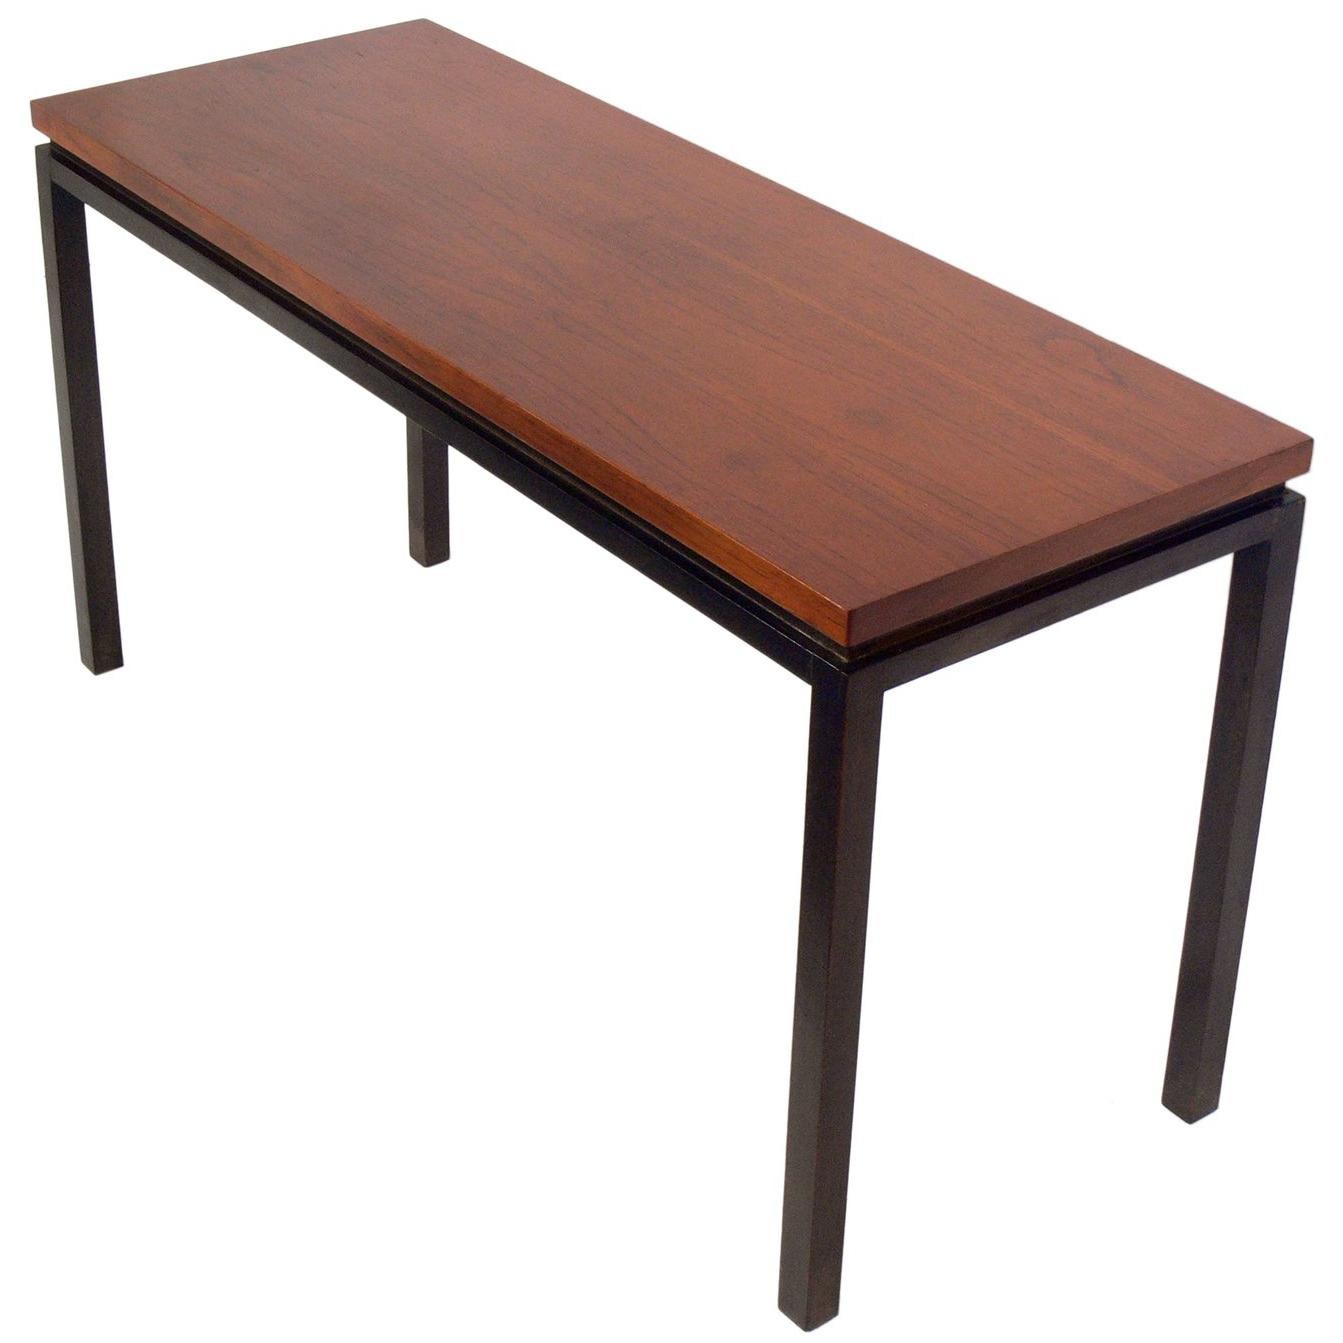 Clean Lined Console Table by Edward Wormley for Dunbar